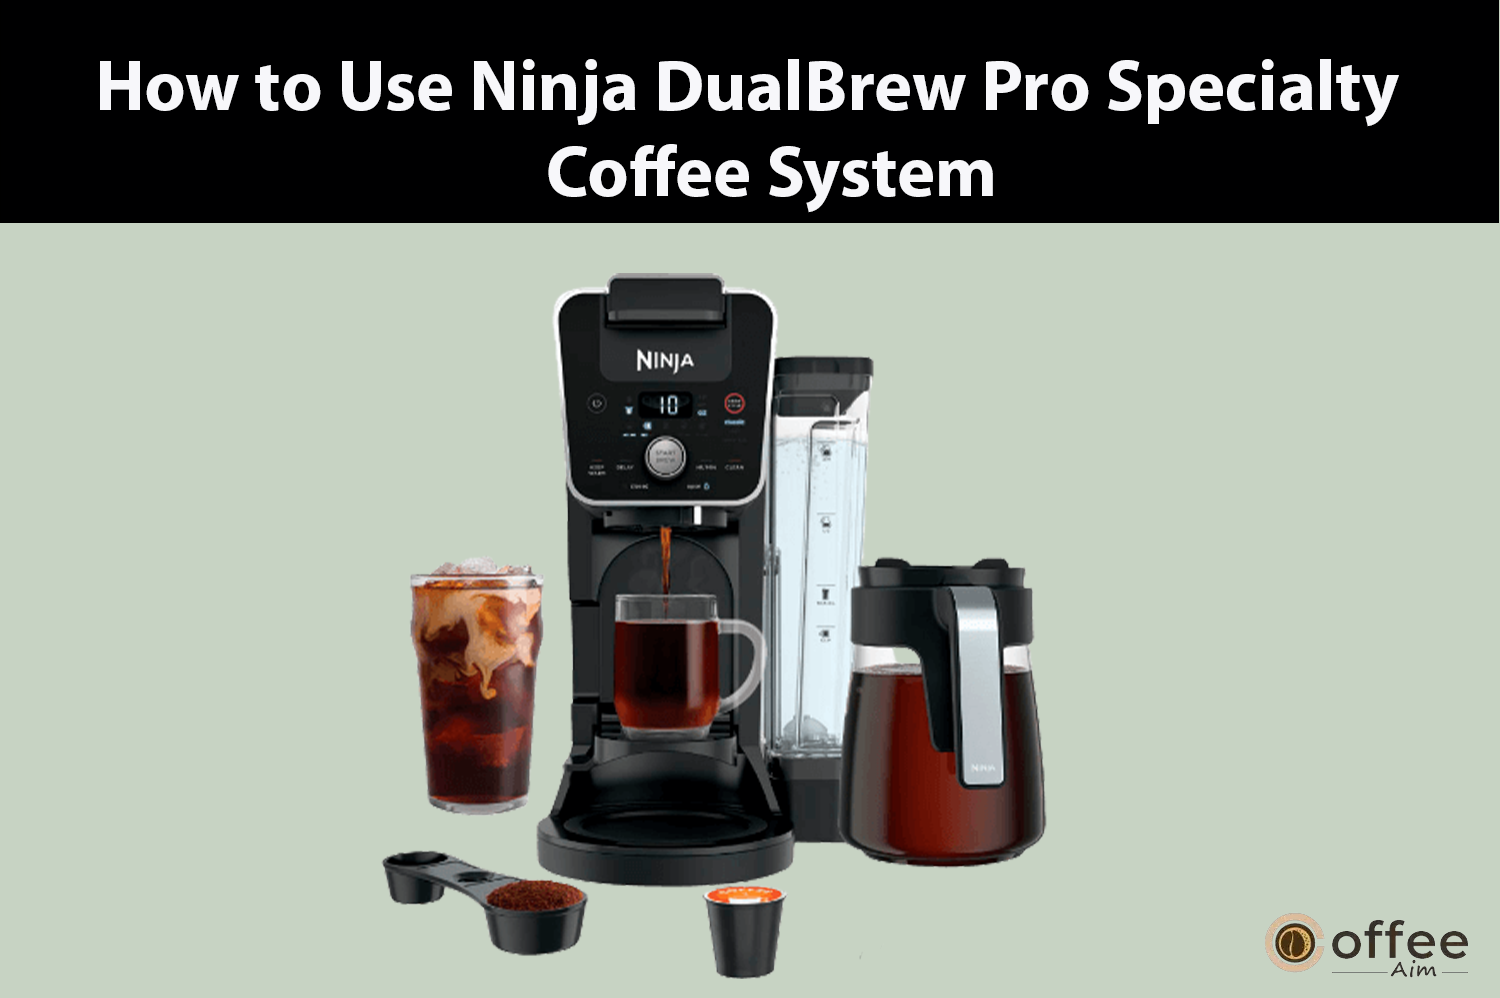 Featured image for the article"How to use Ninja DualBrew Pro Speciality Coffee System".